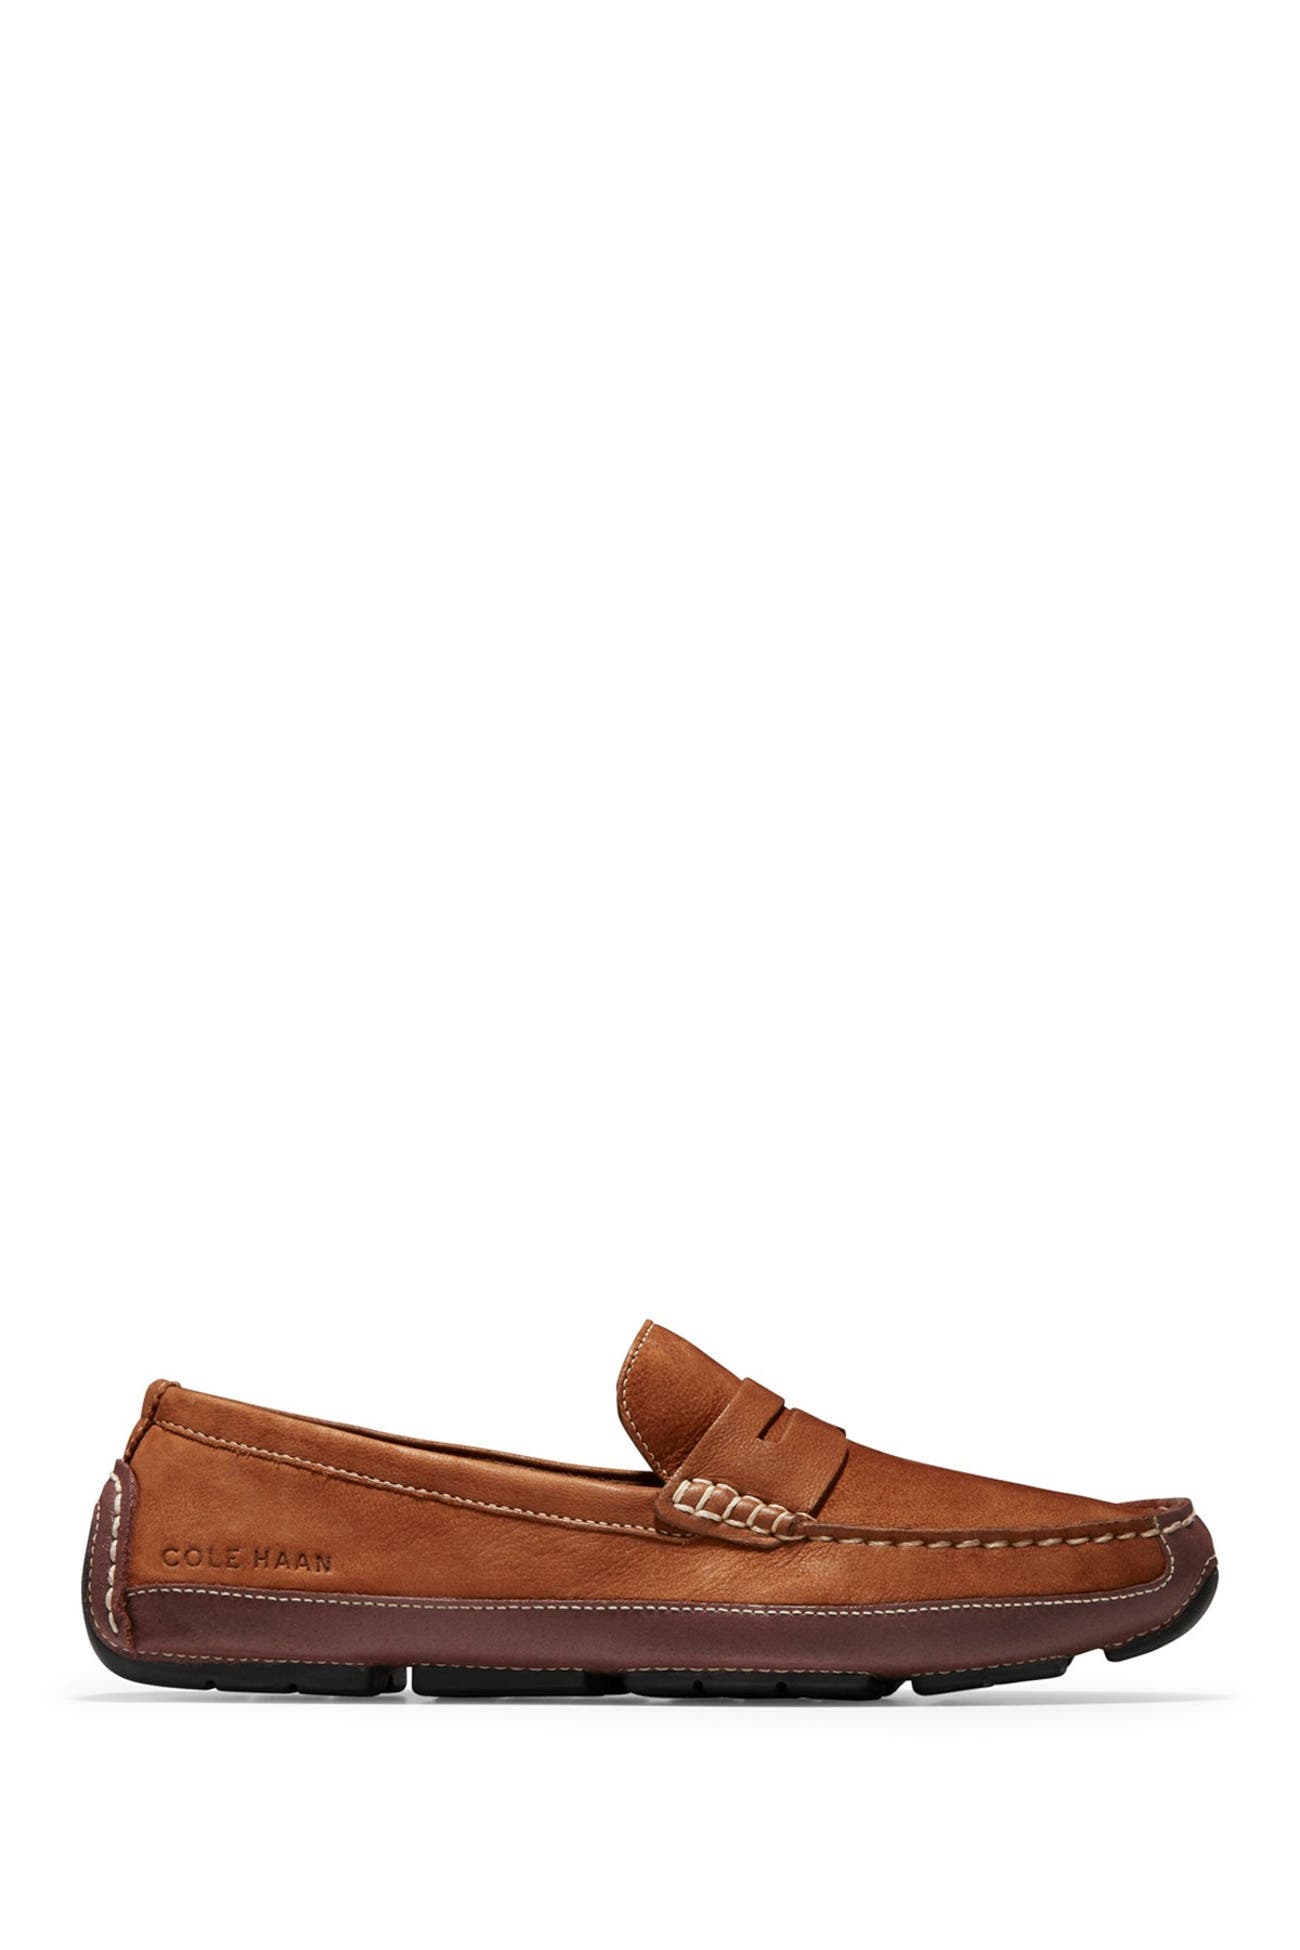 Cole Haan | Wyatt Penny Driver Driving Style Loafer | Nordstrom Rack